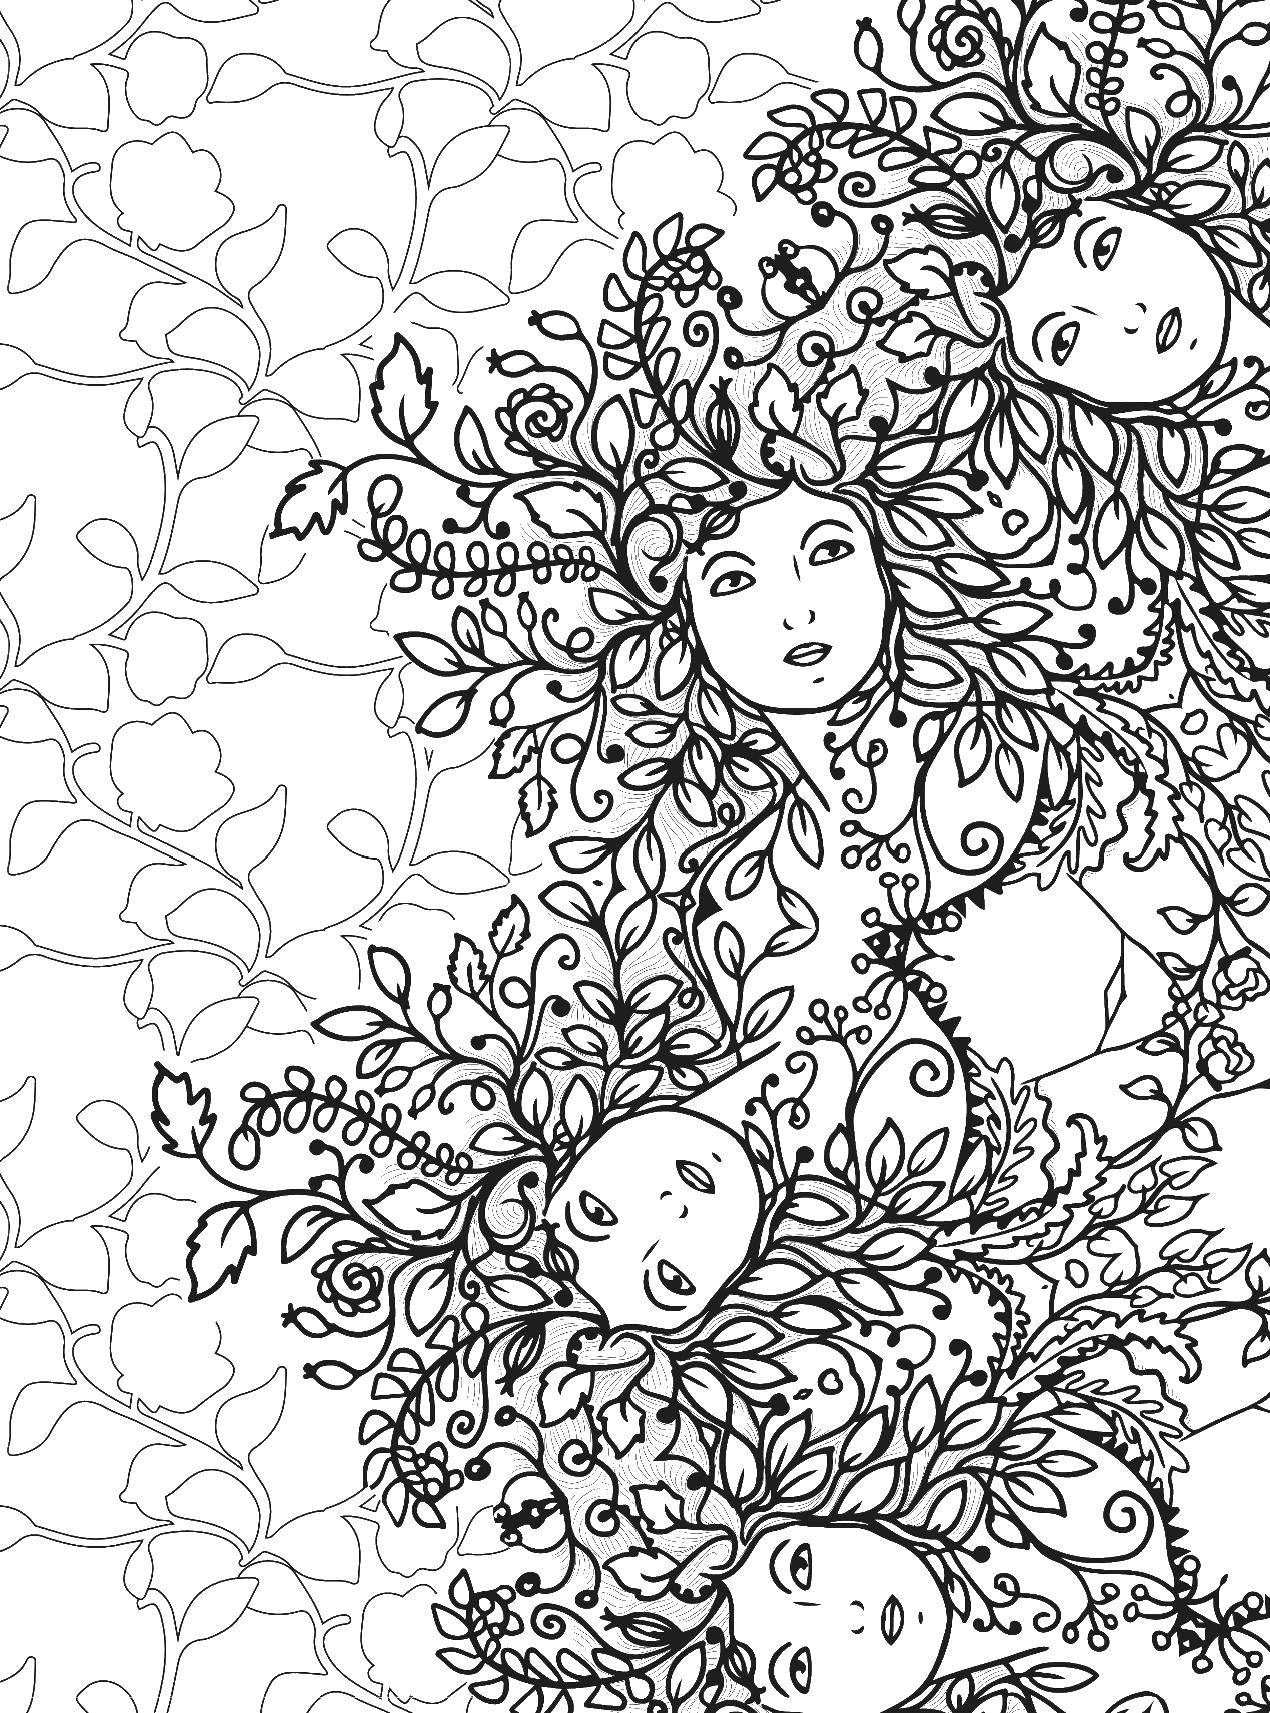 Coloring Forest nymph. Category coloring antistress. Tags:  the forest nymphs.